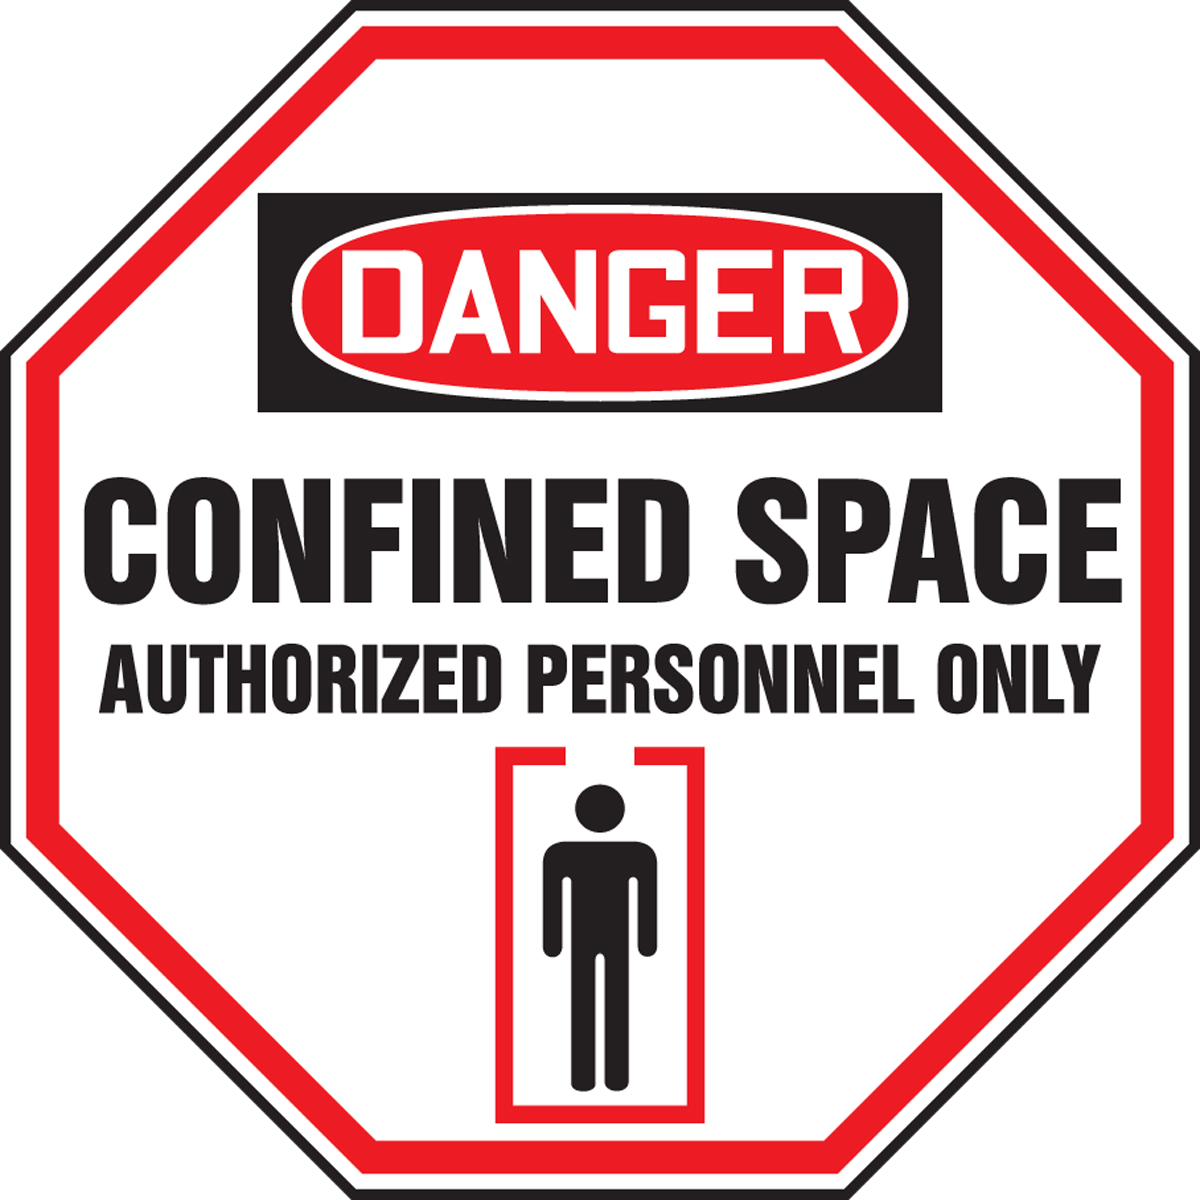 DANGER CONFINED SPACE AUTHORIZED PERSONNEL ONLY (W/GRAPHIC)